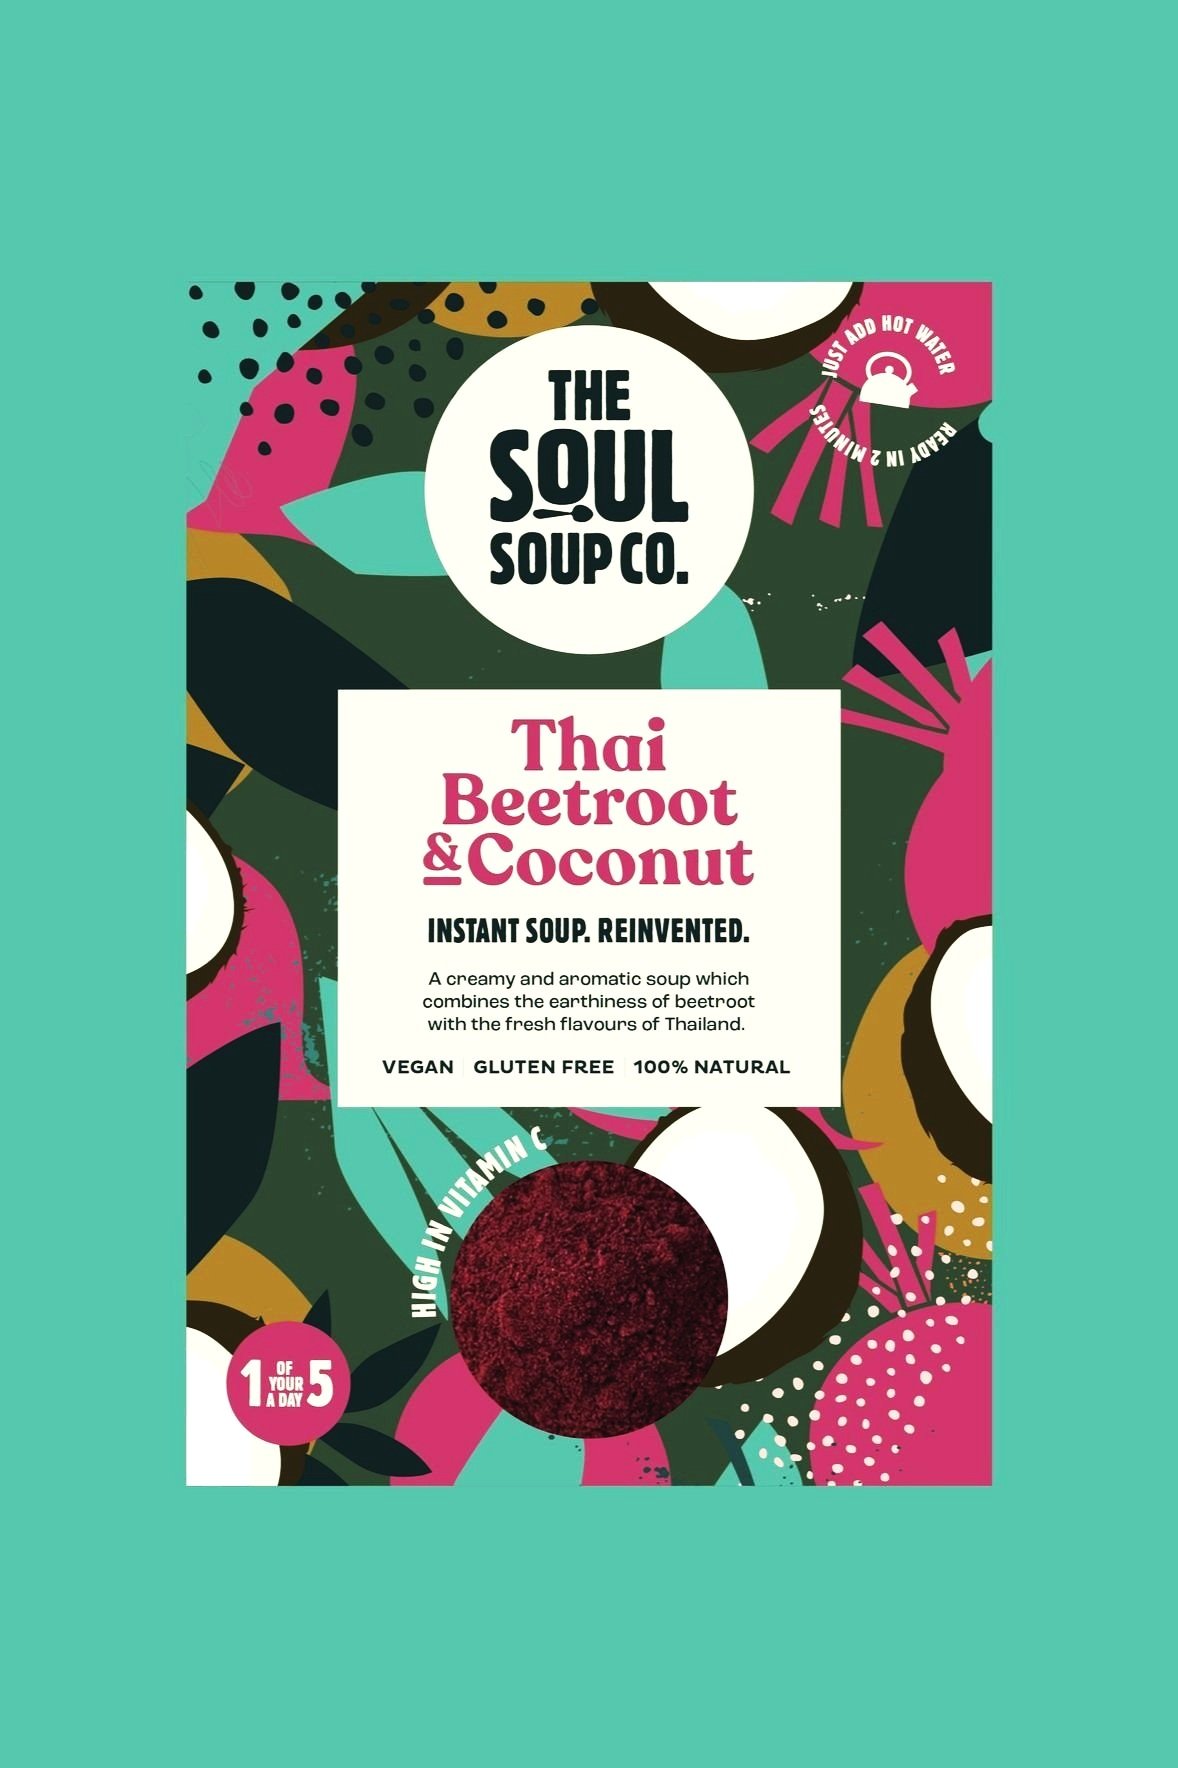 Packaging-designer-Packaging design for a soup company